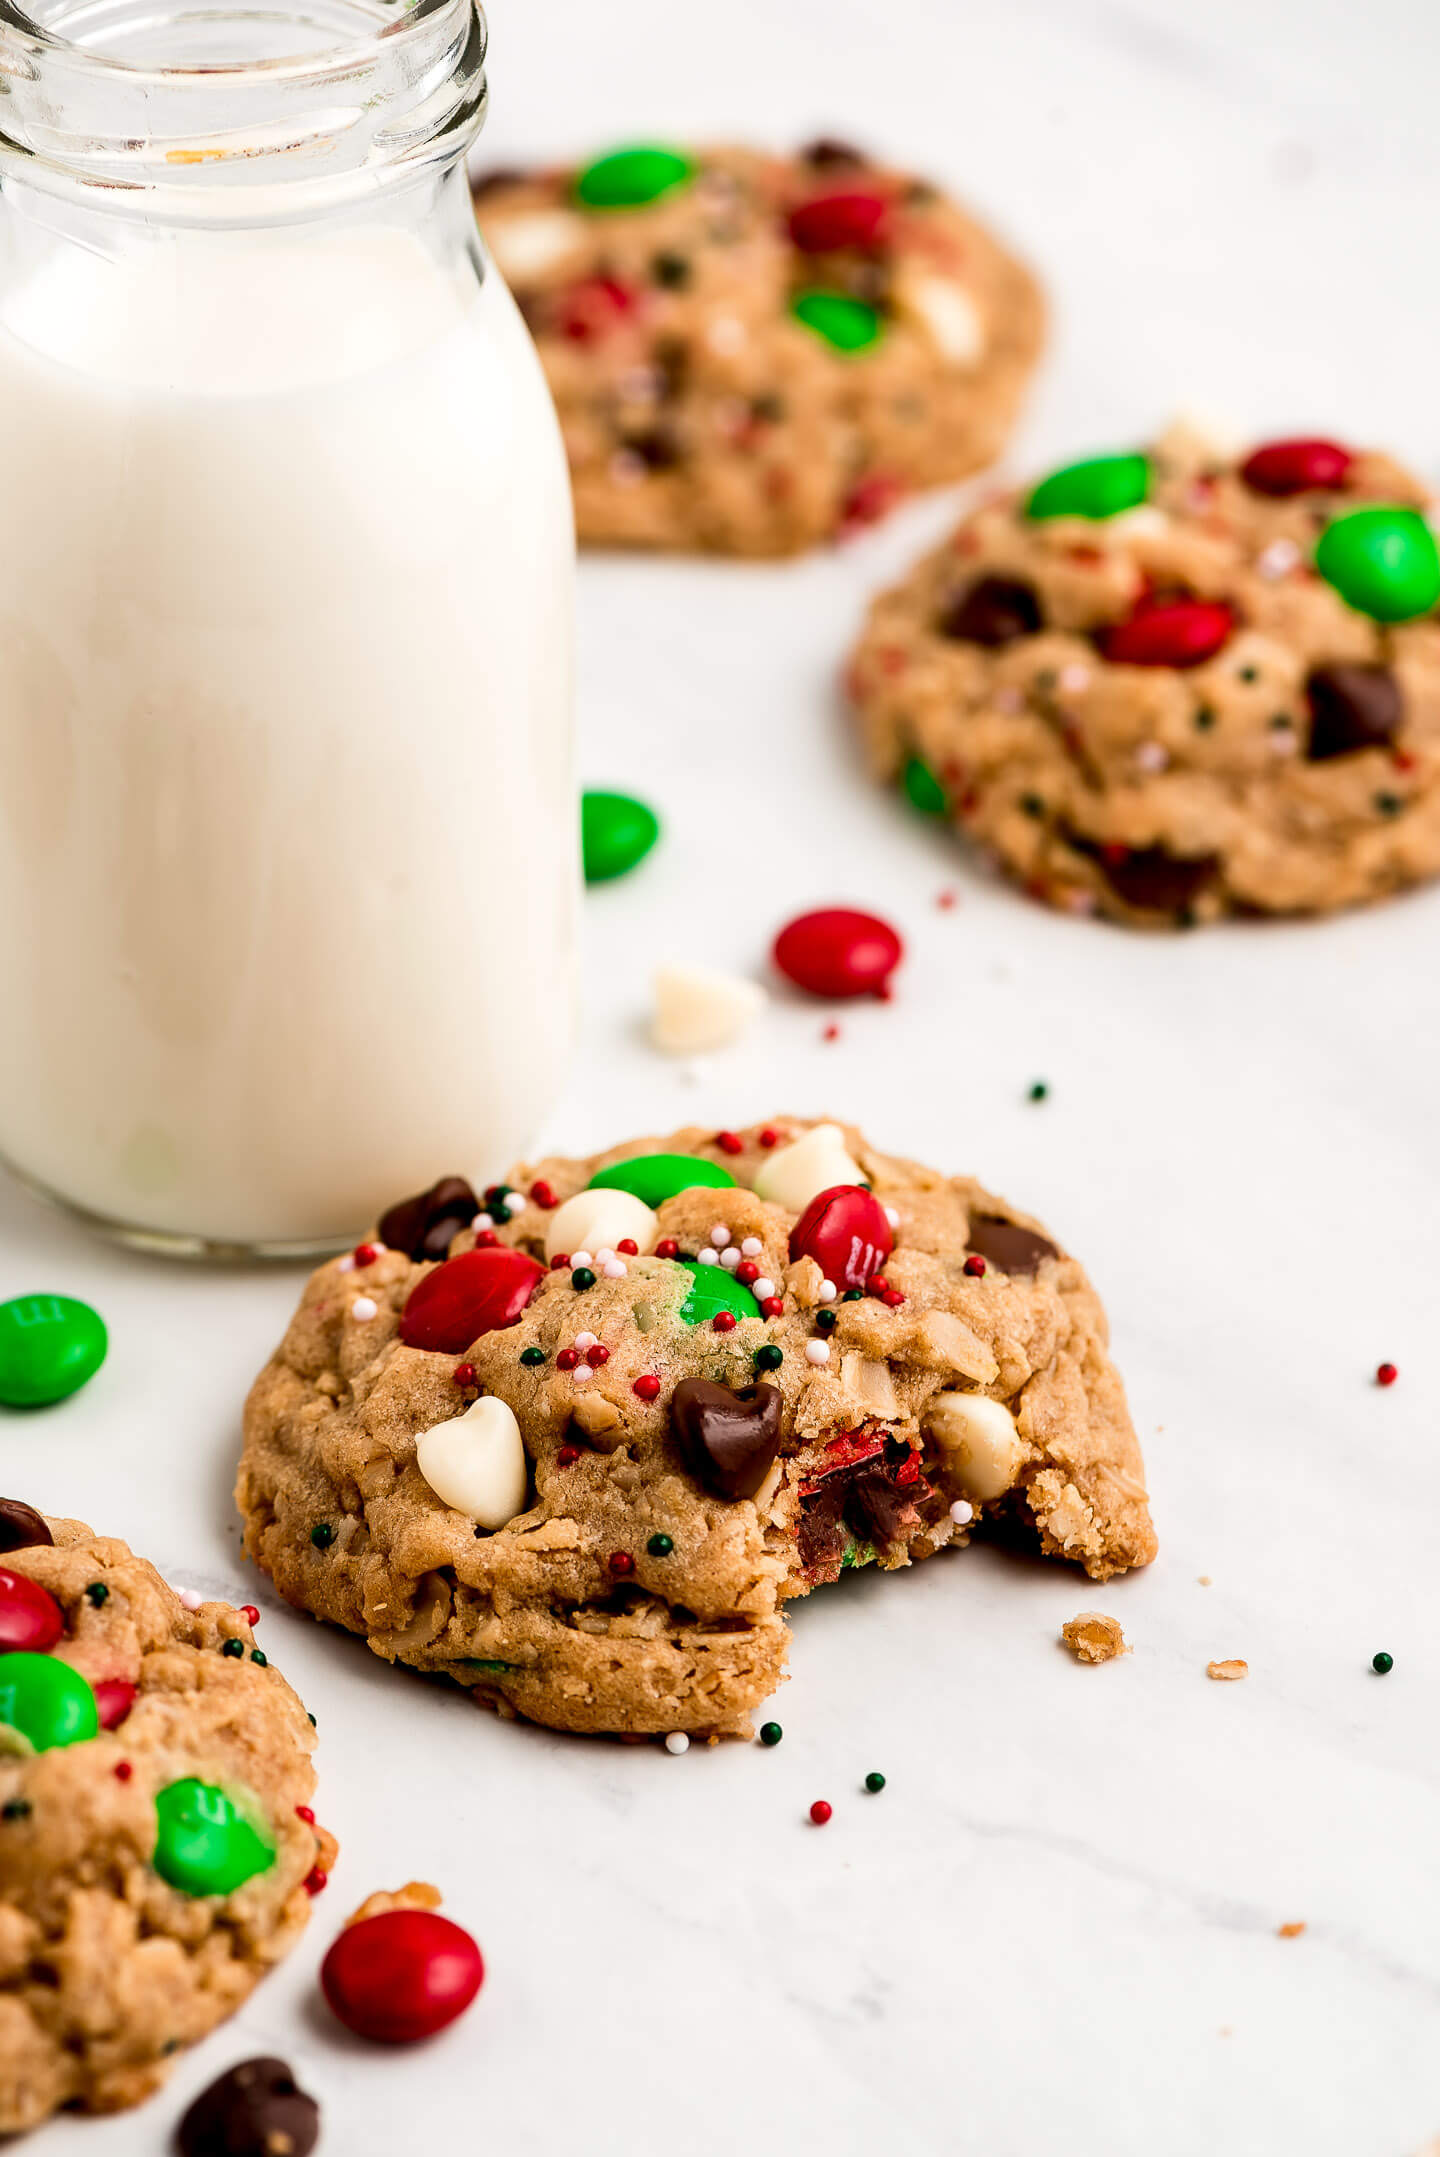 A Christmas Monster Cookie with a bite taken out and a jar of milk.